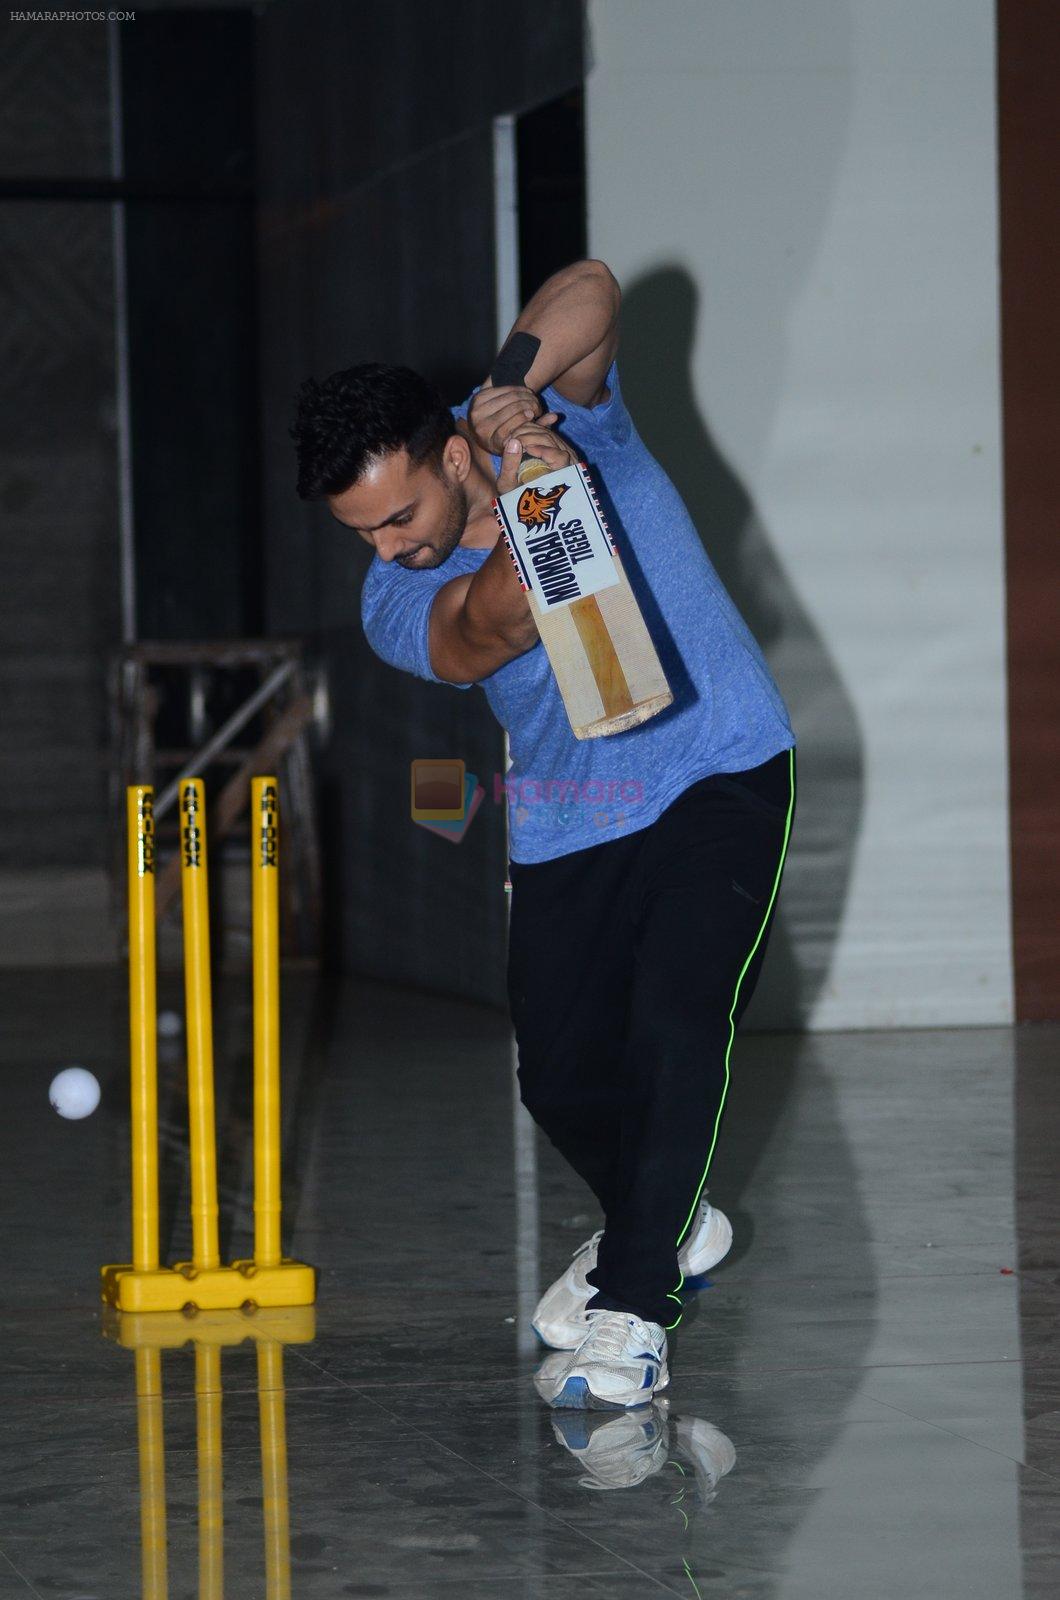 at BCL match practise on 15th Feb 2016